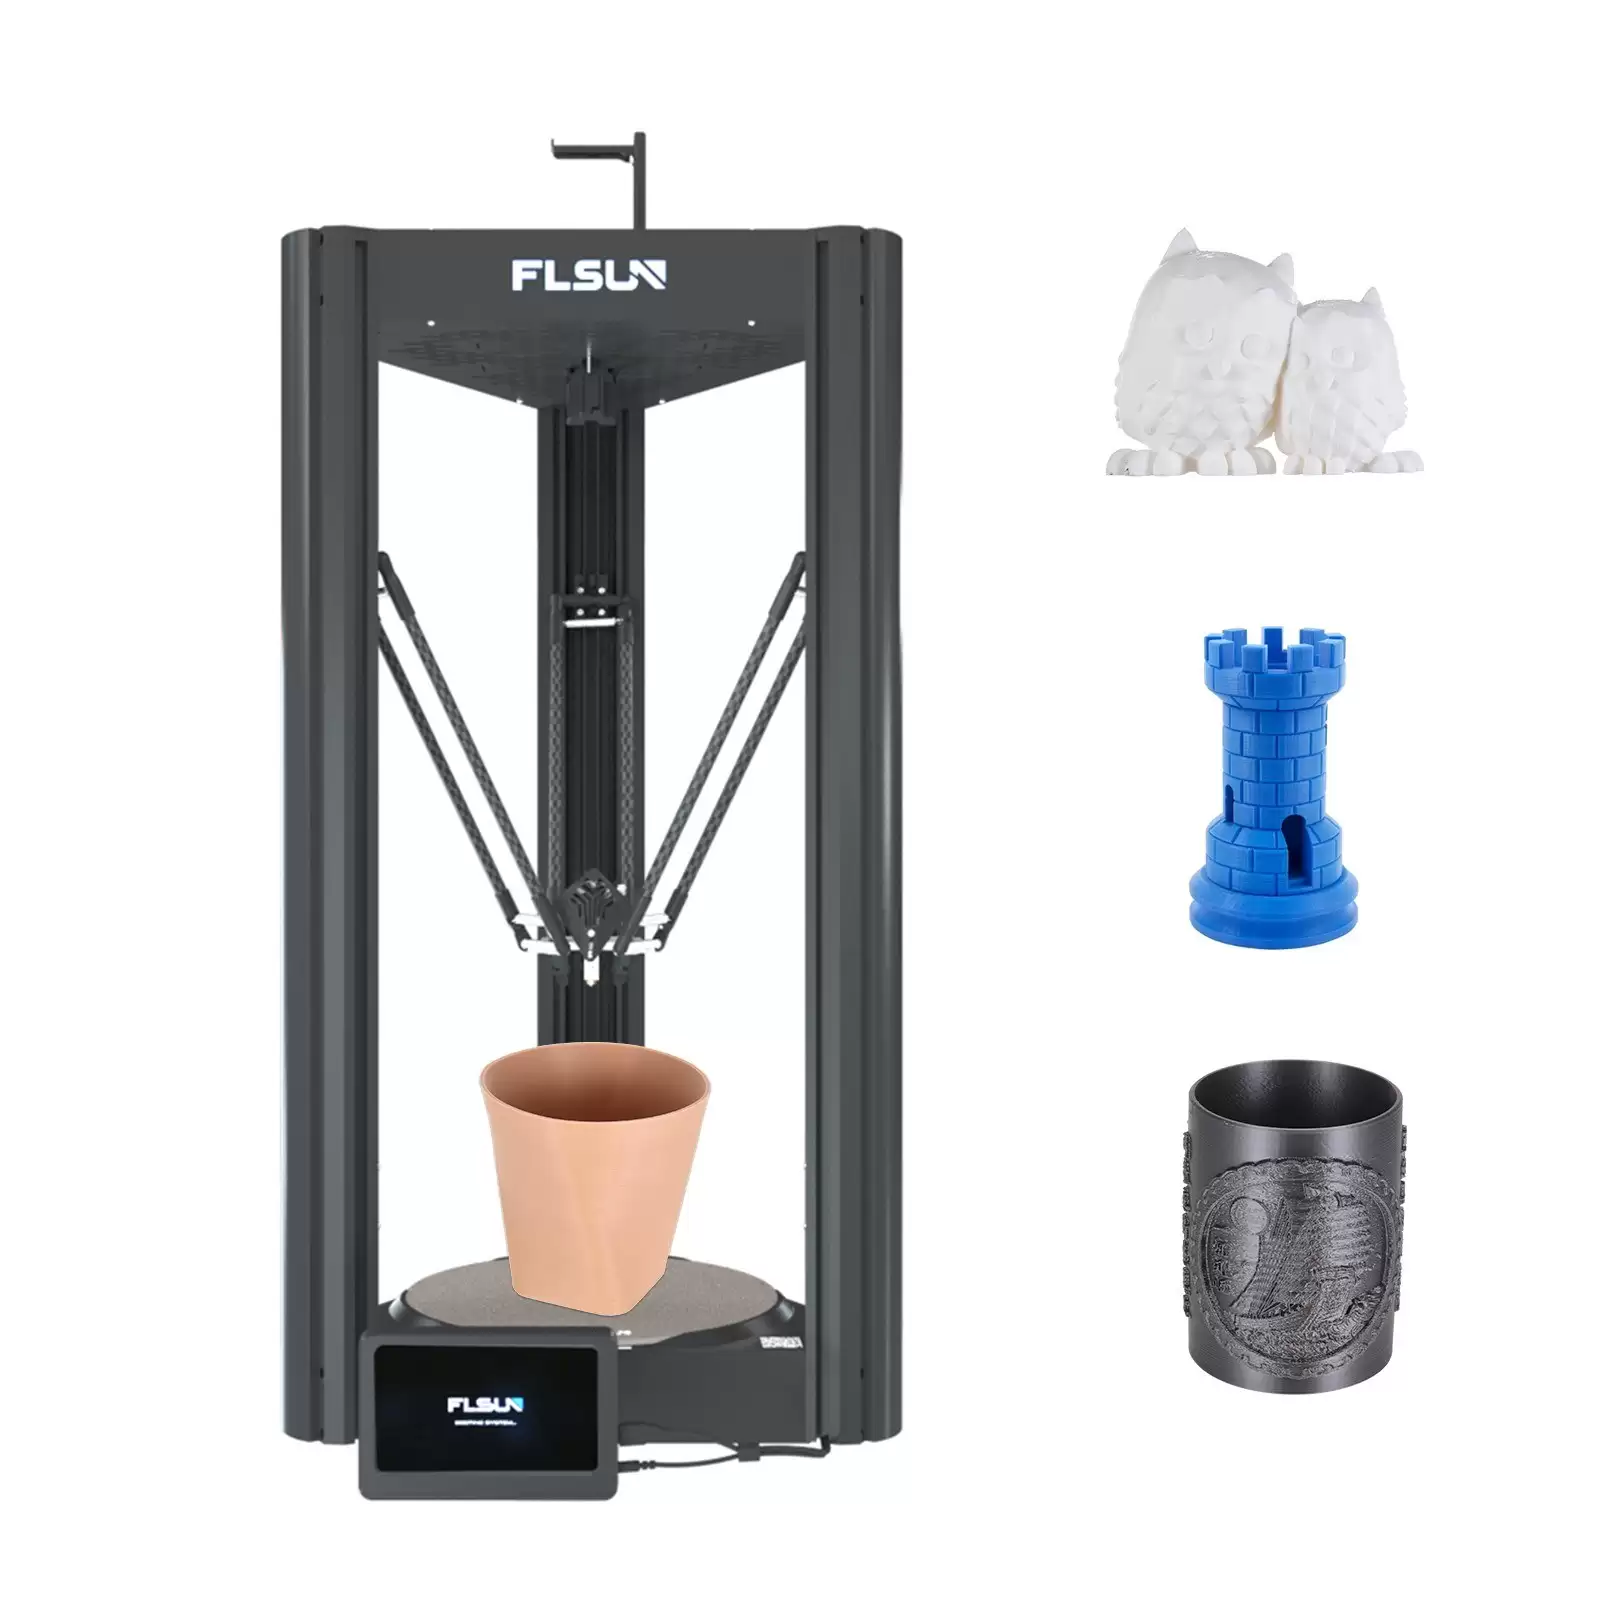 Spend $669.99 Flsun V400 Fdm 3d Printer ,Free Shipping With This Cafago Discount Voucher